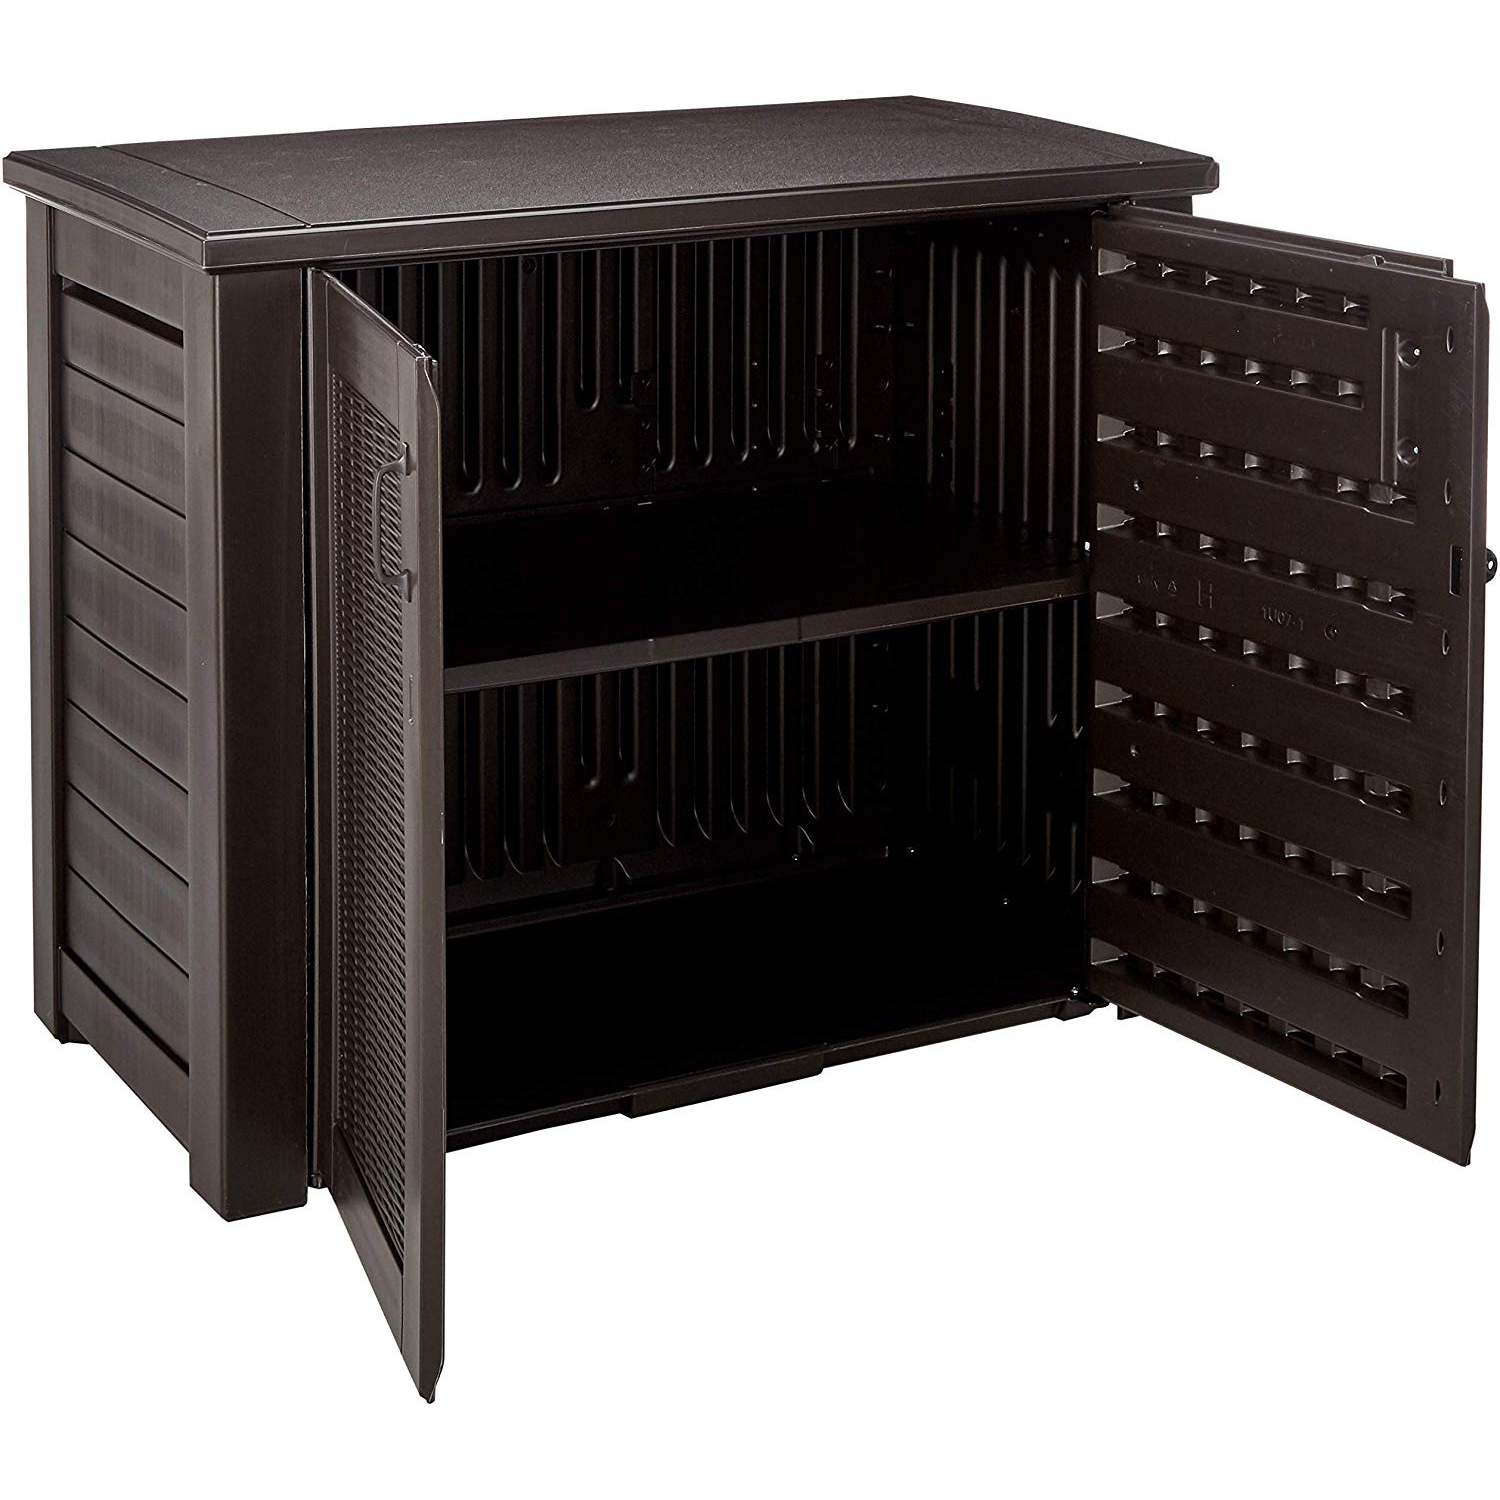 Rubbermaid Weather Resistant Resin Chic Outdoor Patio Storage